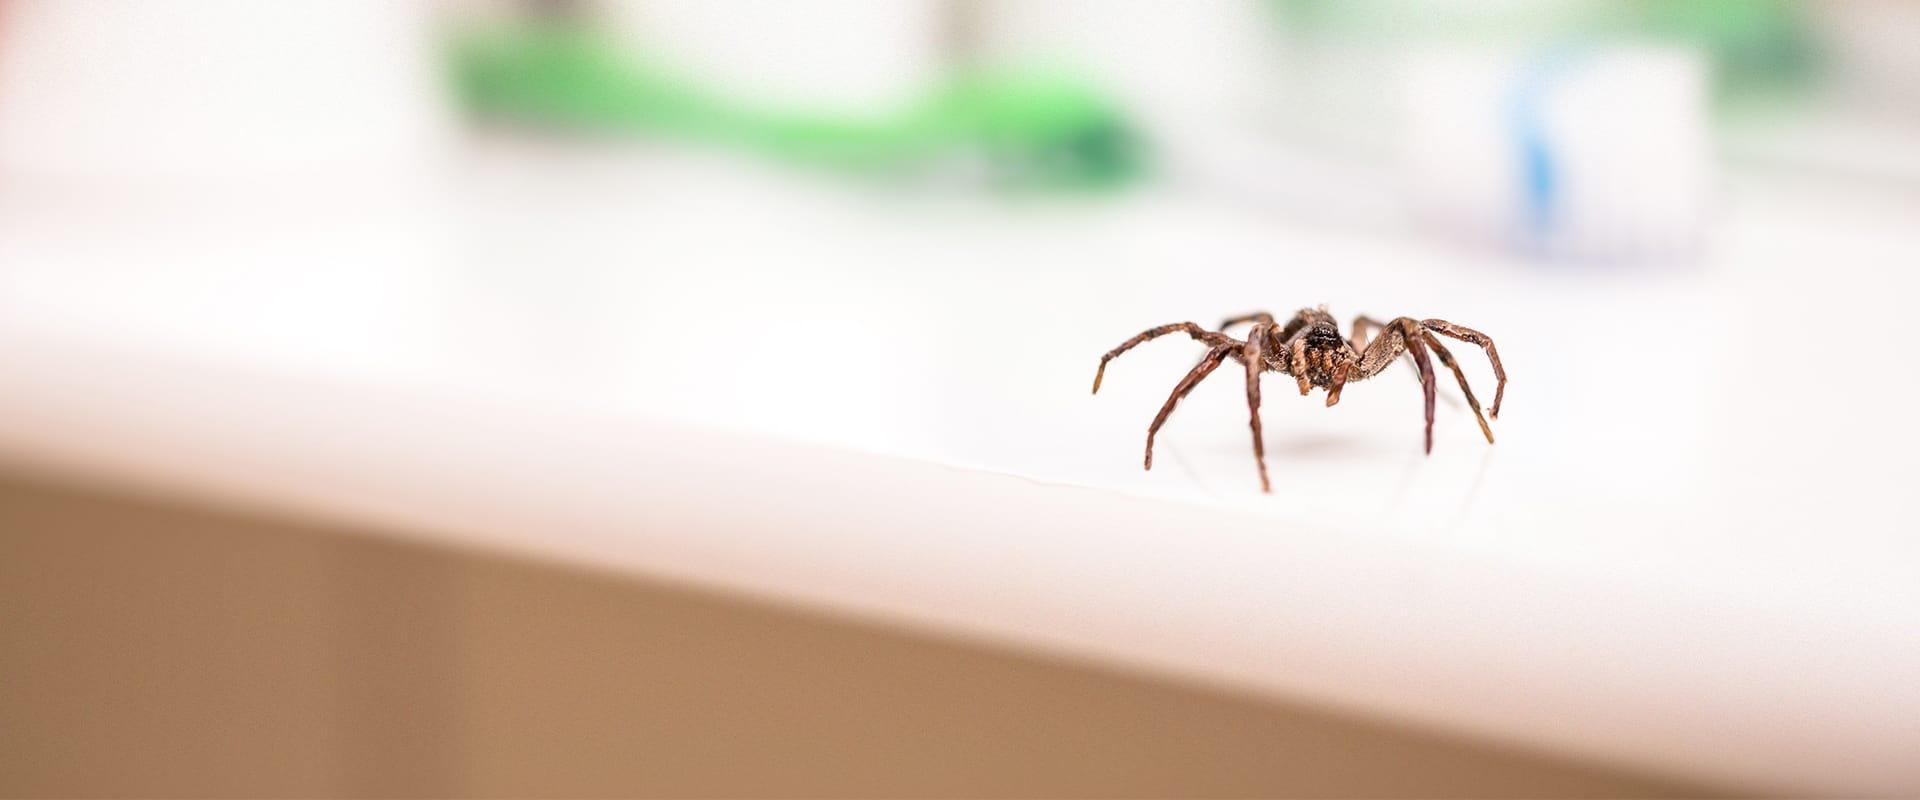 spider crawling on countertop